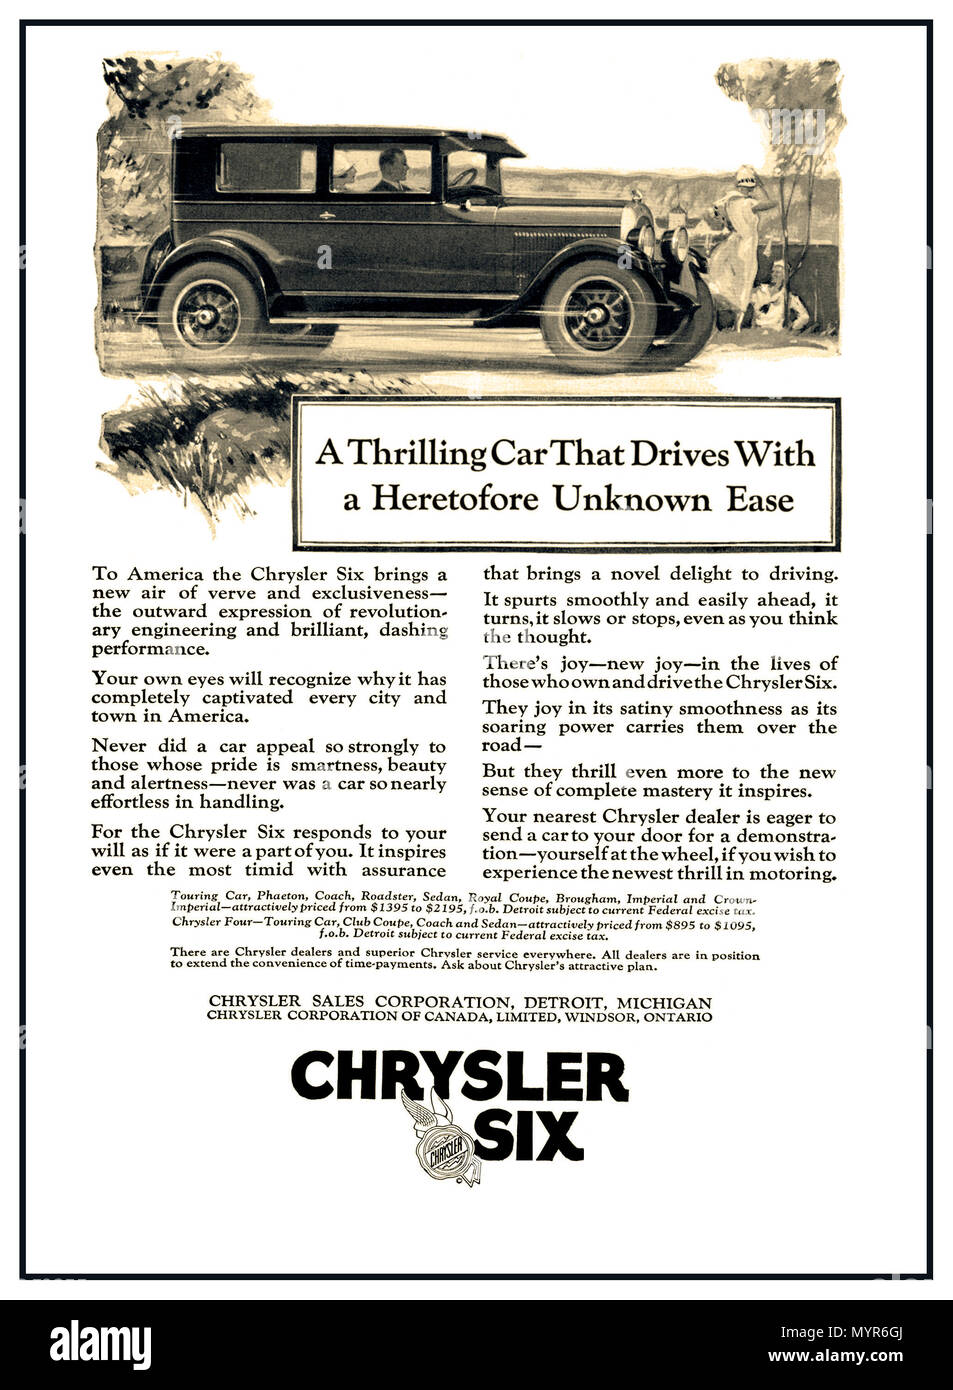 CHRYSLER SIX 1920’s Vintage press Advertisement for 1926 Chrysler Six Automobile Car Speed Stability Touring Ad Print poster The car advertised a powerful, six-cylinder engine which could achieve speeds of 70 mph using just 20 miles per gallon. The Chrysler Six also featured aluminum pistons, replaceable oil and air filters, shock absorbers, and standard-equipment hydraulic brakes on all wheels. Stock Photo